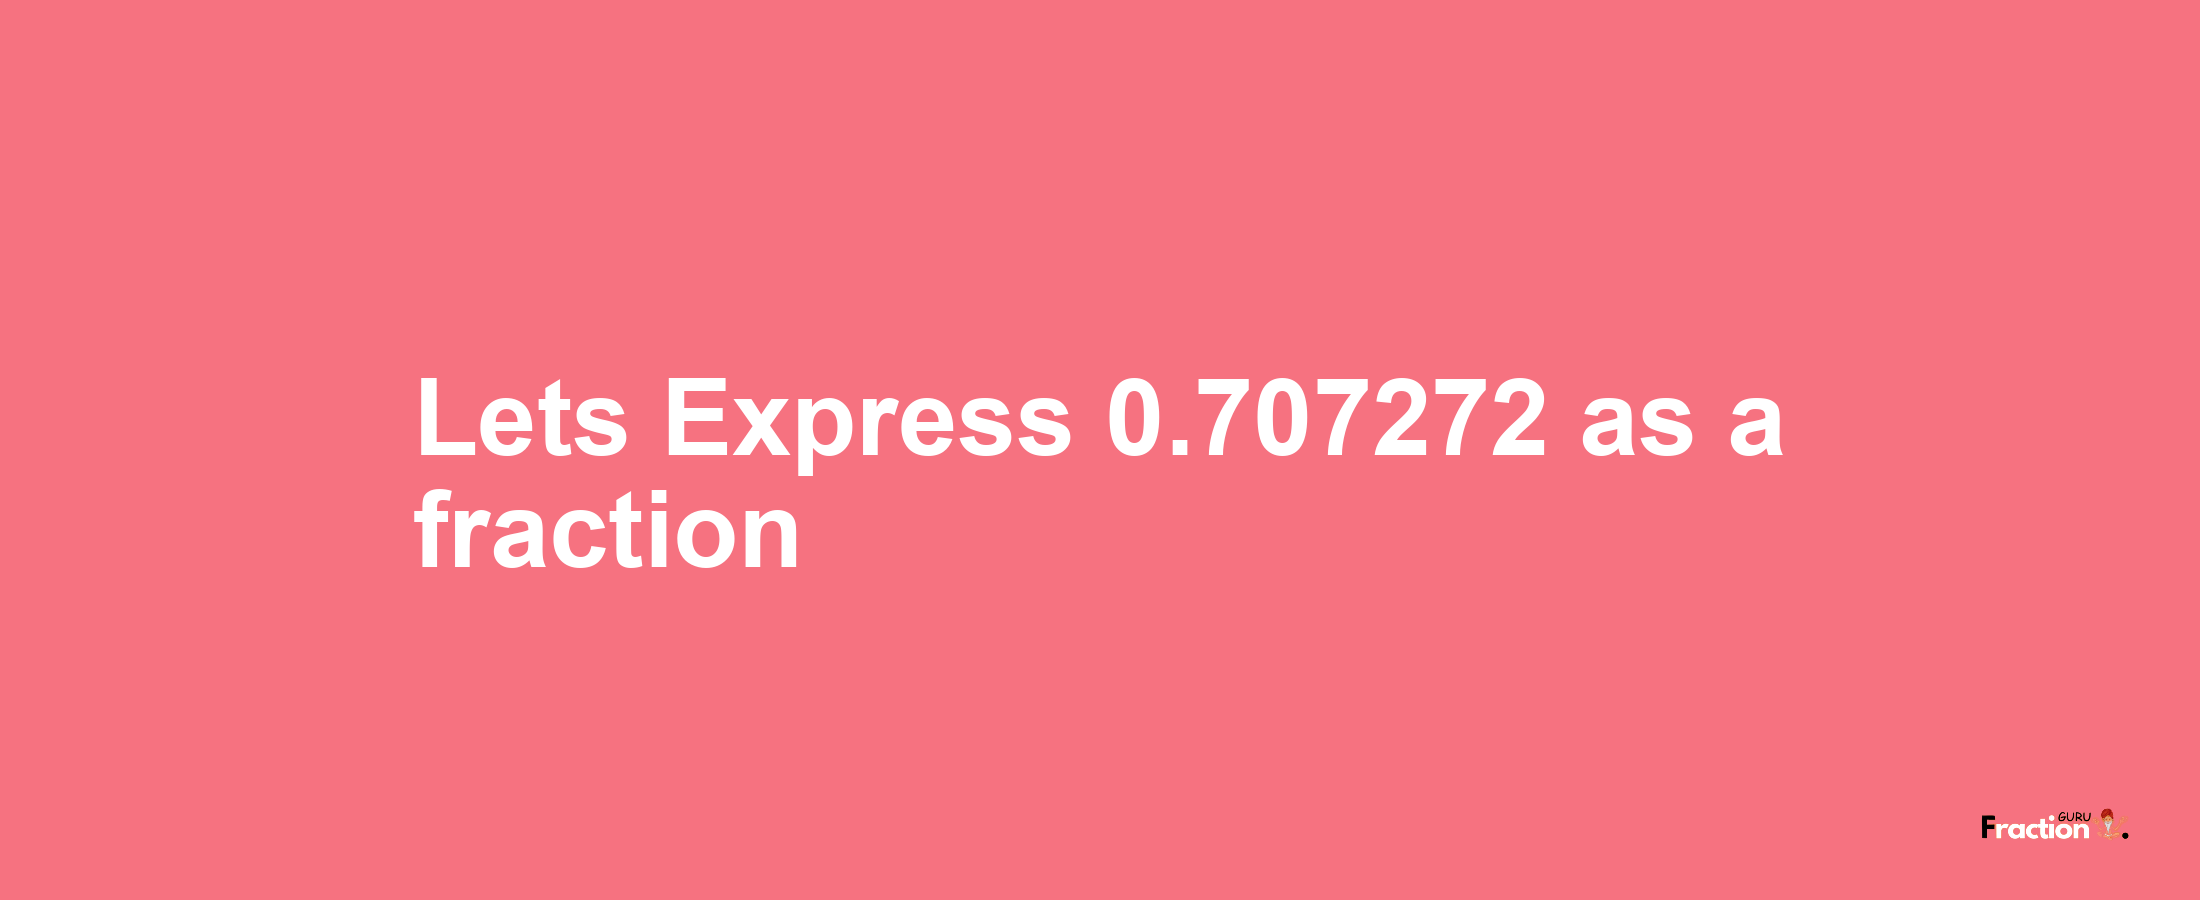 Lets Express 0.707272 as afraction